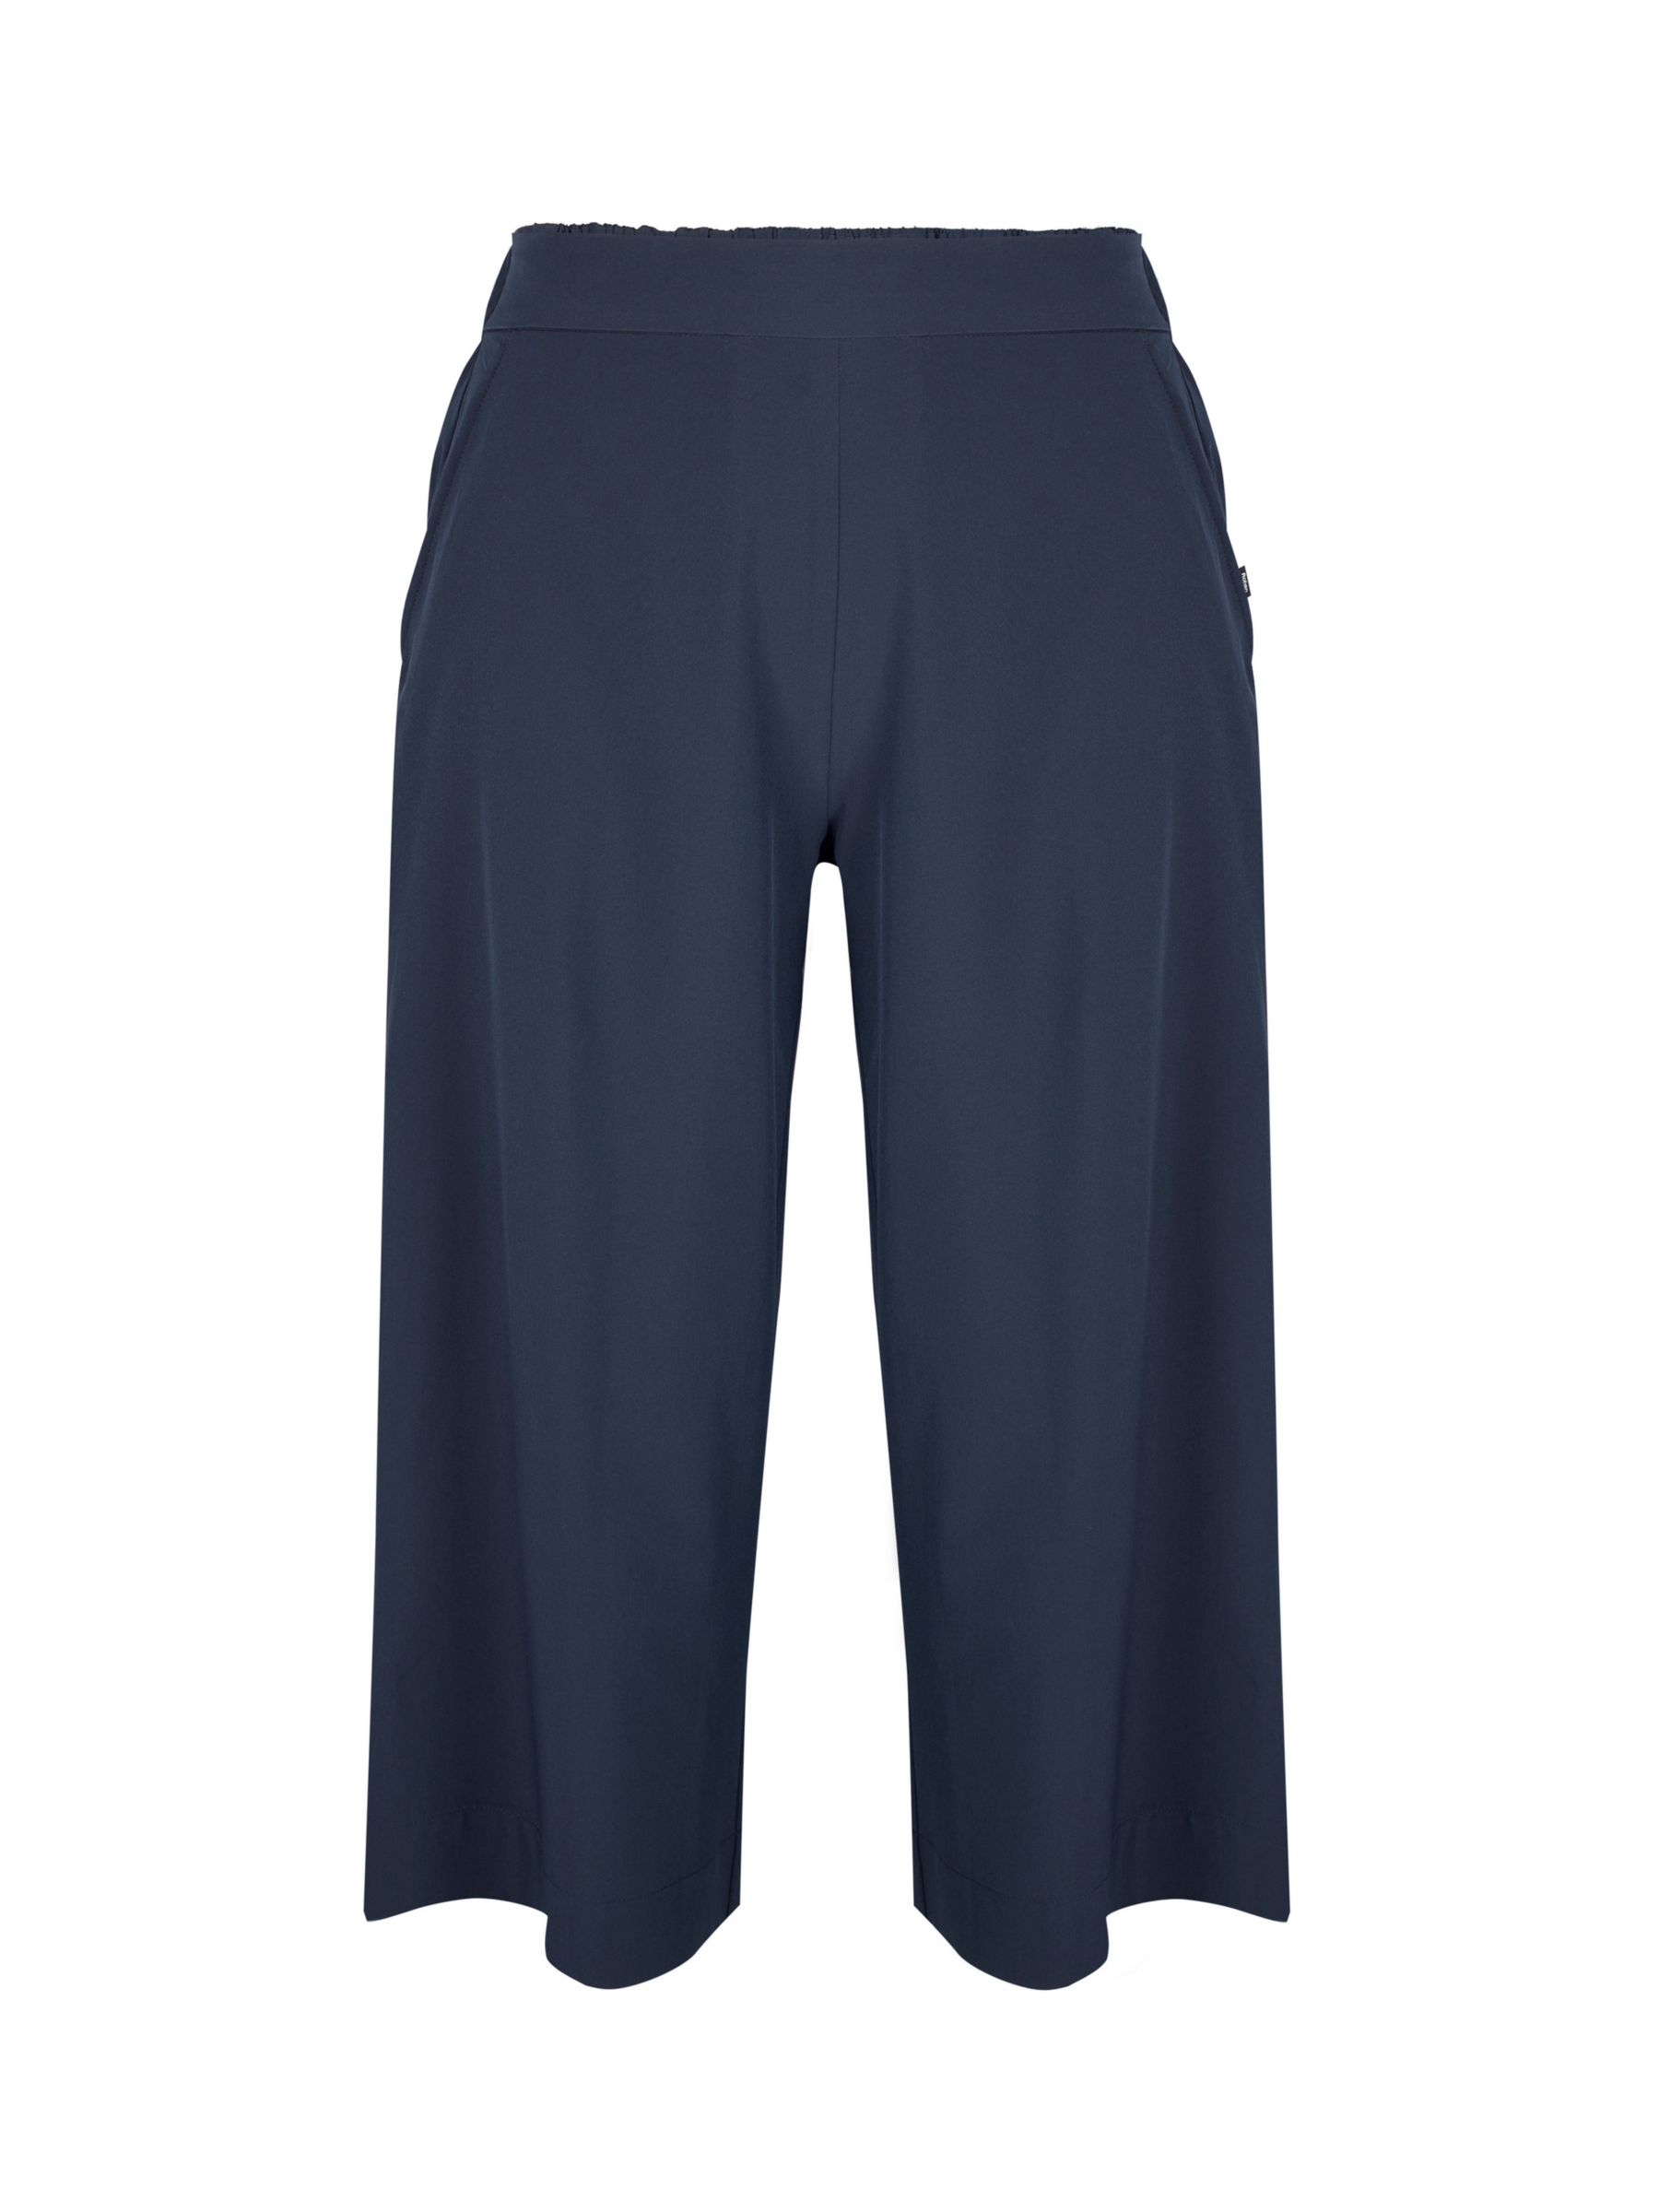 Buy Rohan Voyager Capris Trousers Online at johnlewis.com